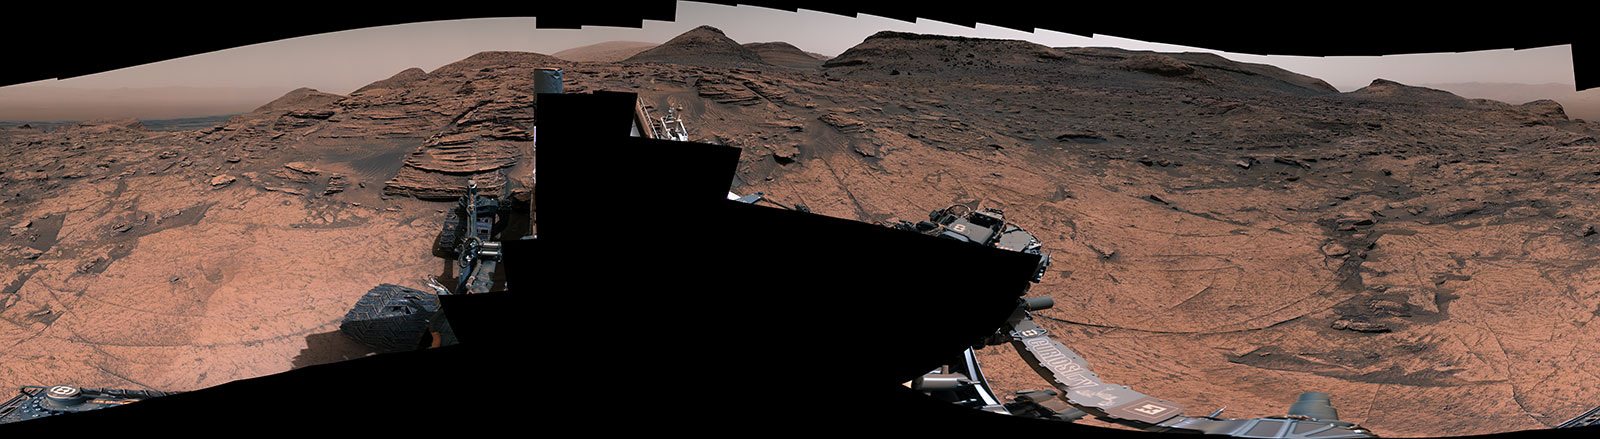 Panorama is made up of 127 individual images taken on June 20, 2022 by NASA'S Curiosity Mars rover.